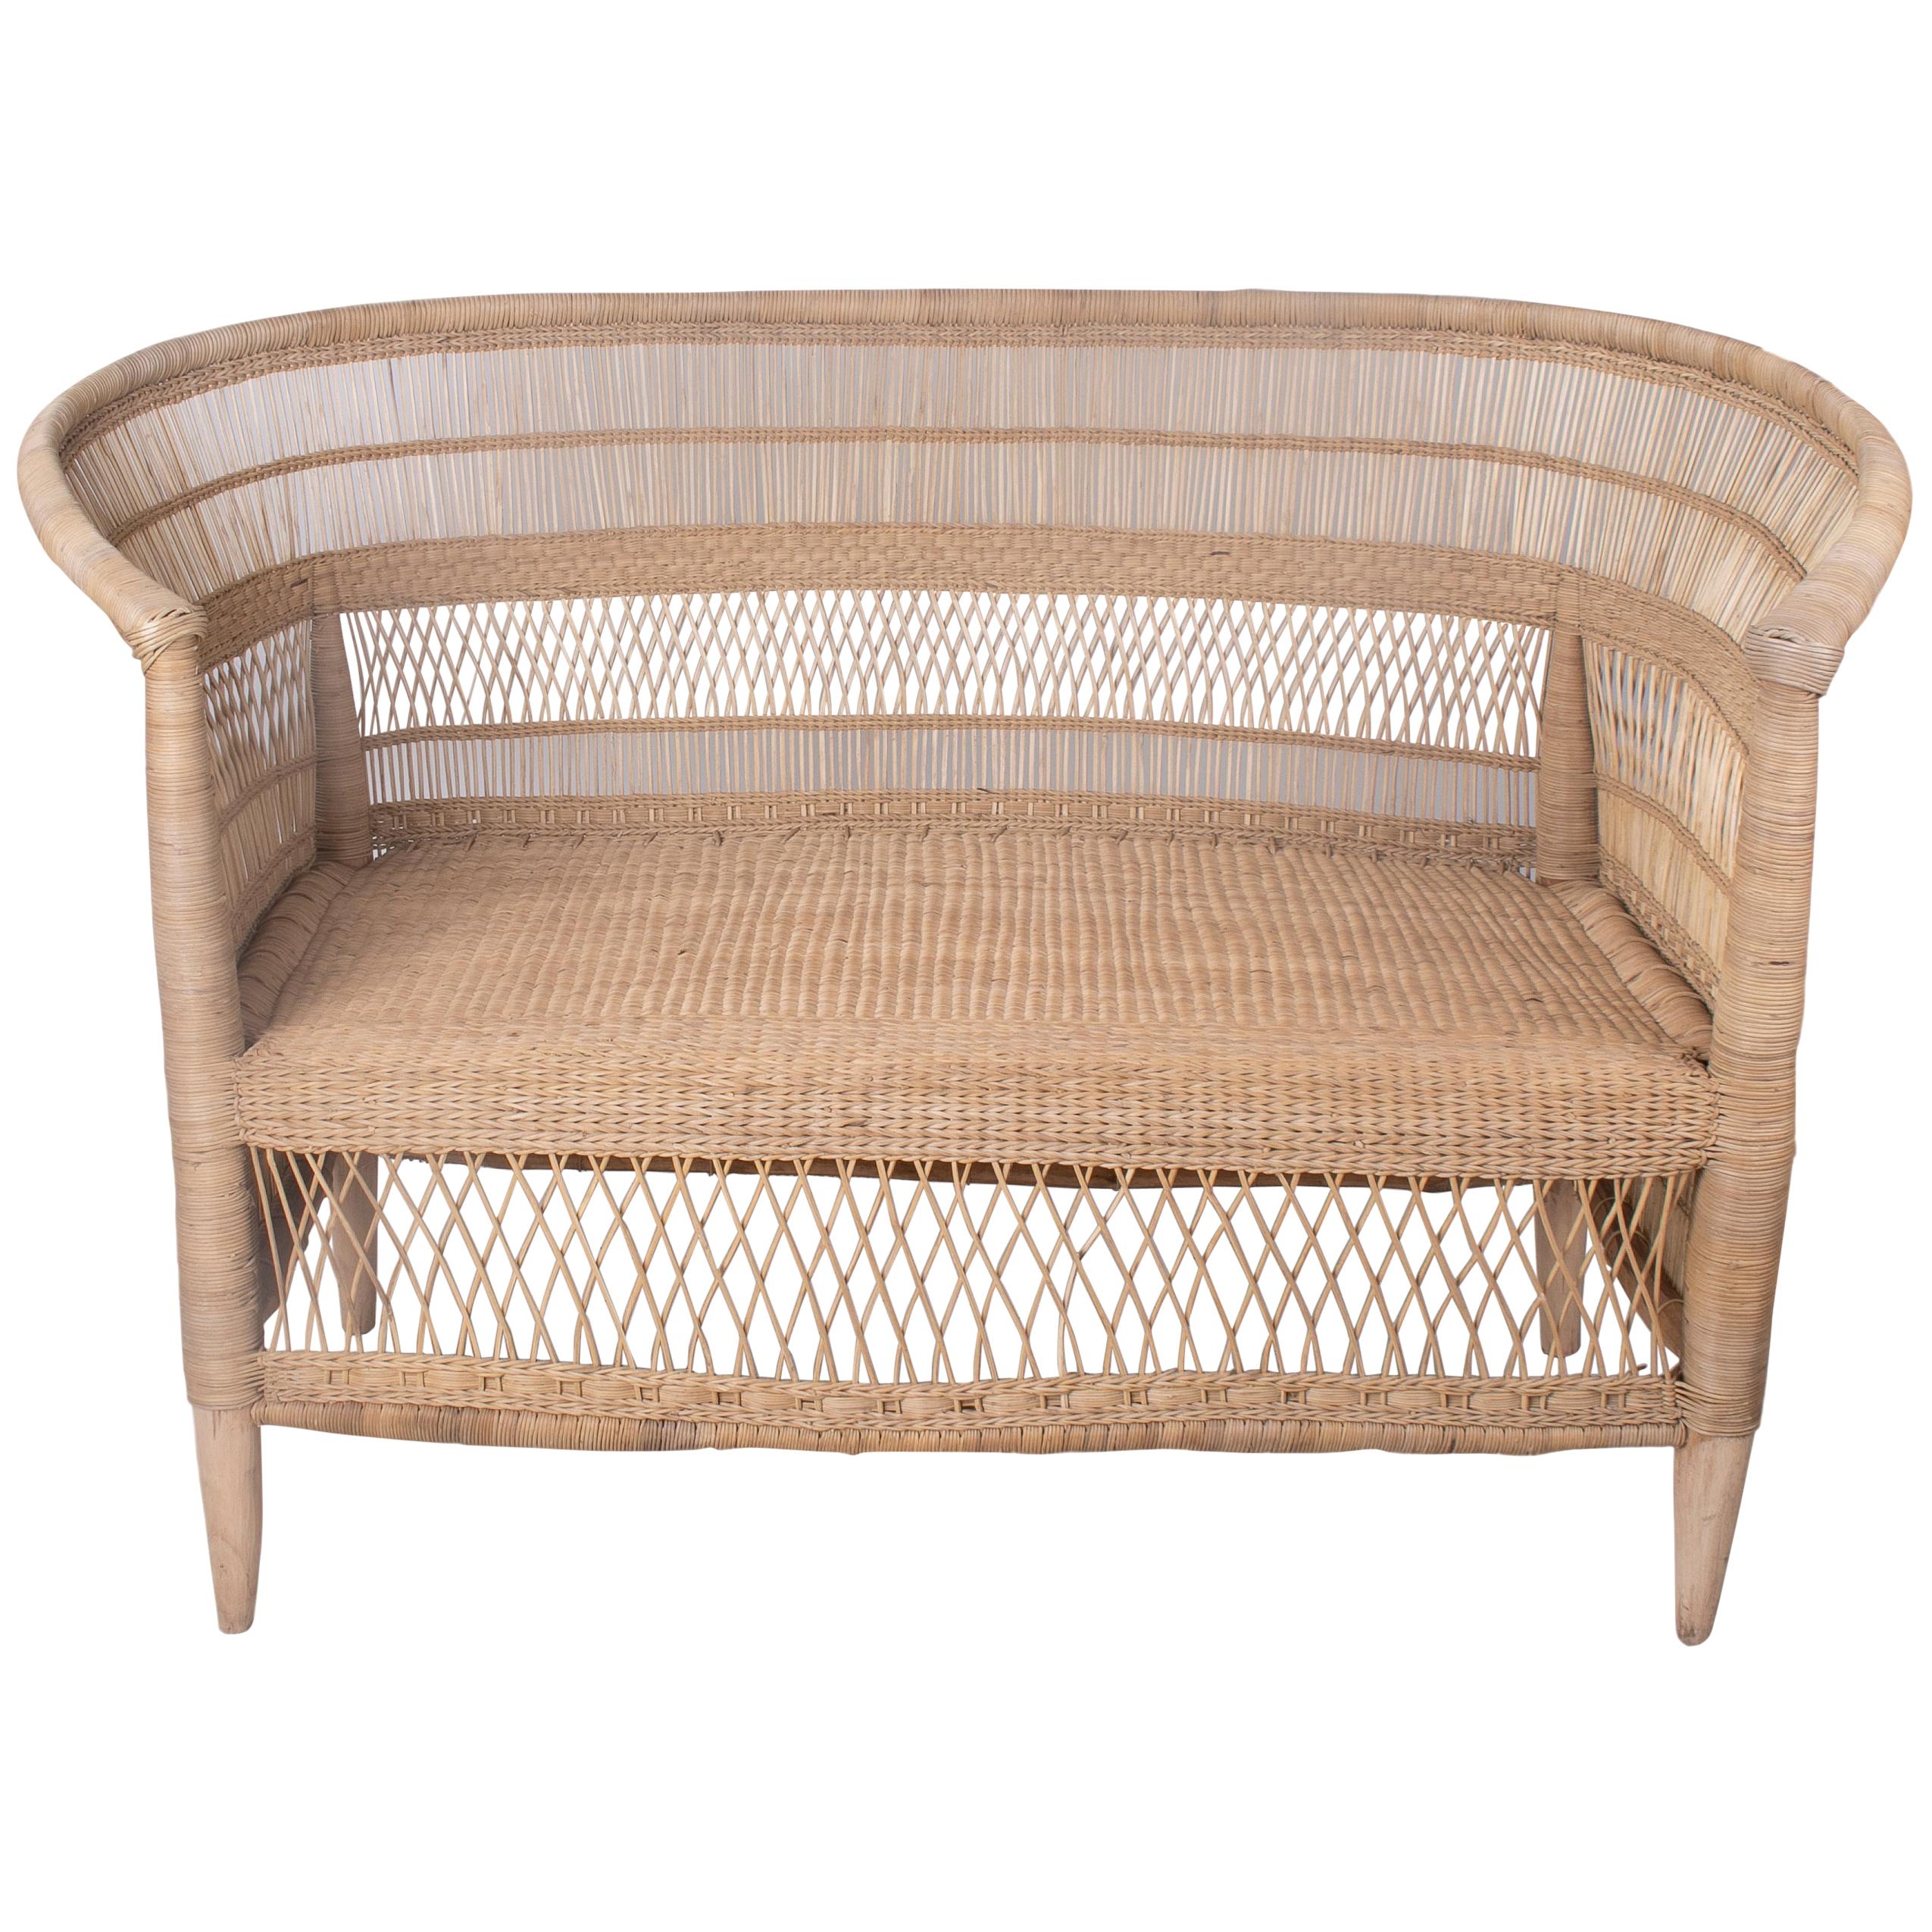 Spanish Two-Seat Hand Woven Rattan Sofa For Sale